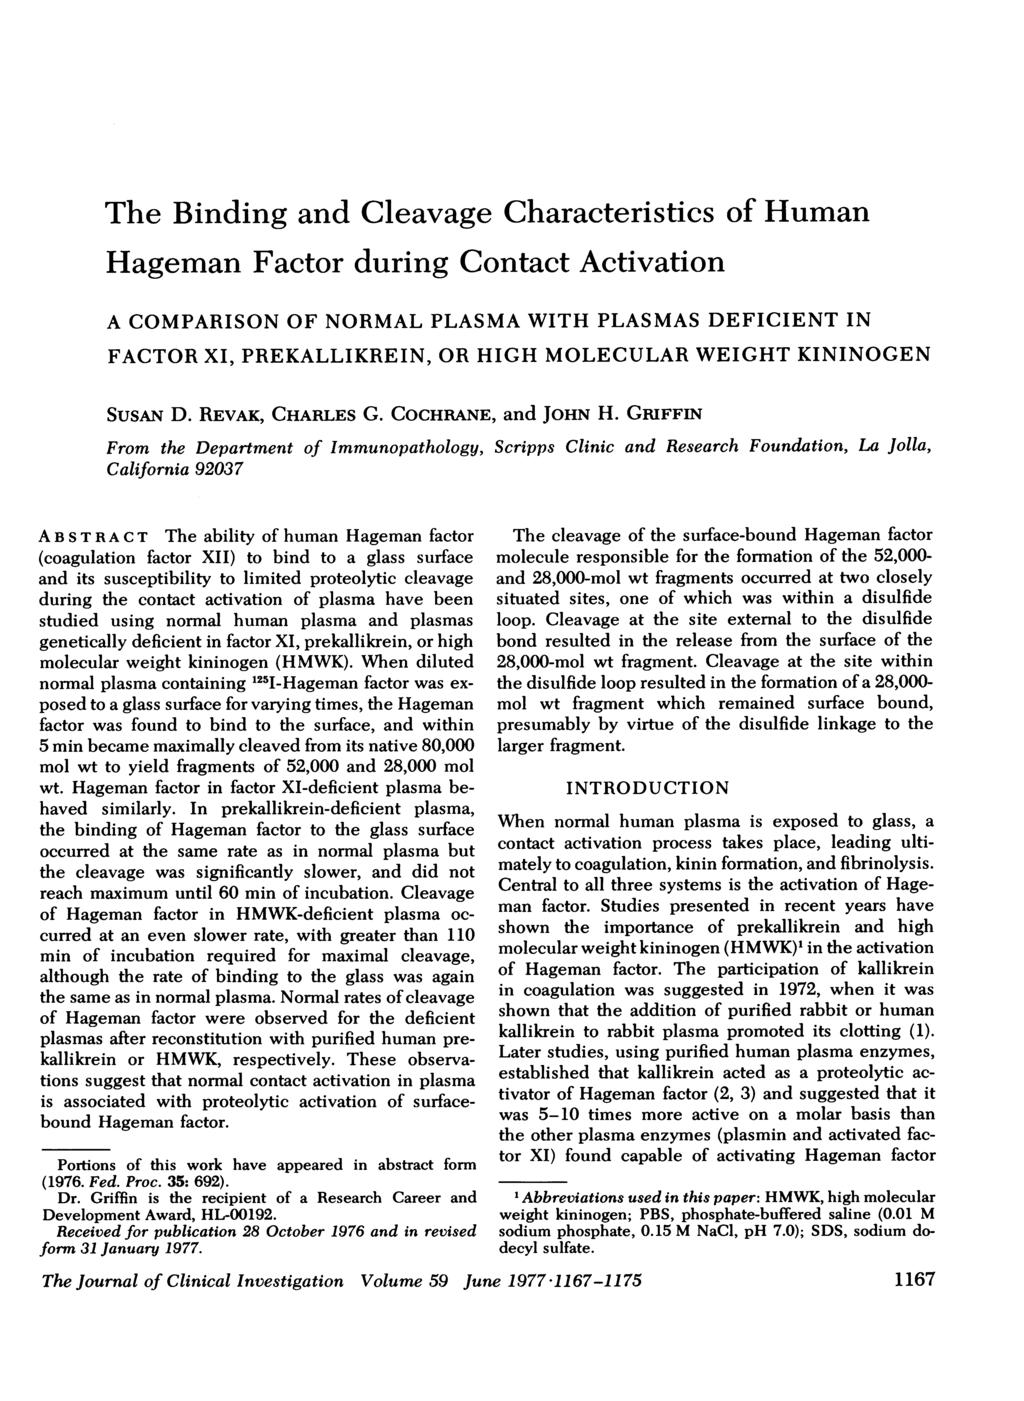 The Binding and Cleavage Characteristics of Human Hageman Factor during Contact Activation A COMPARISON OF NORMAL PLASMA WITH PLASMAS DEFICIENT IN FACTOR XI, PREKALLIKREIN, OR HIGH MOLECULAR WEIGHT